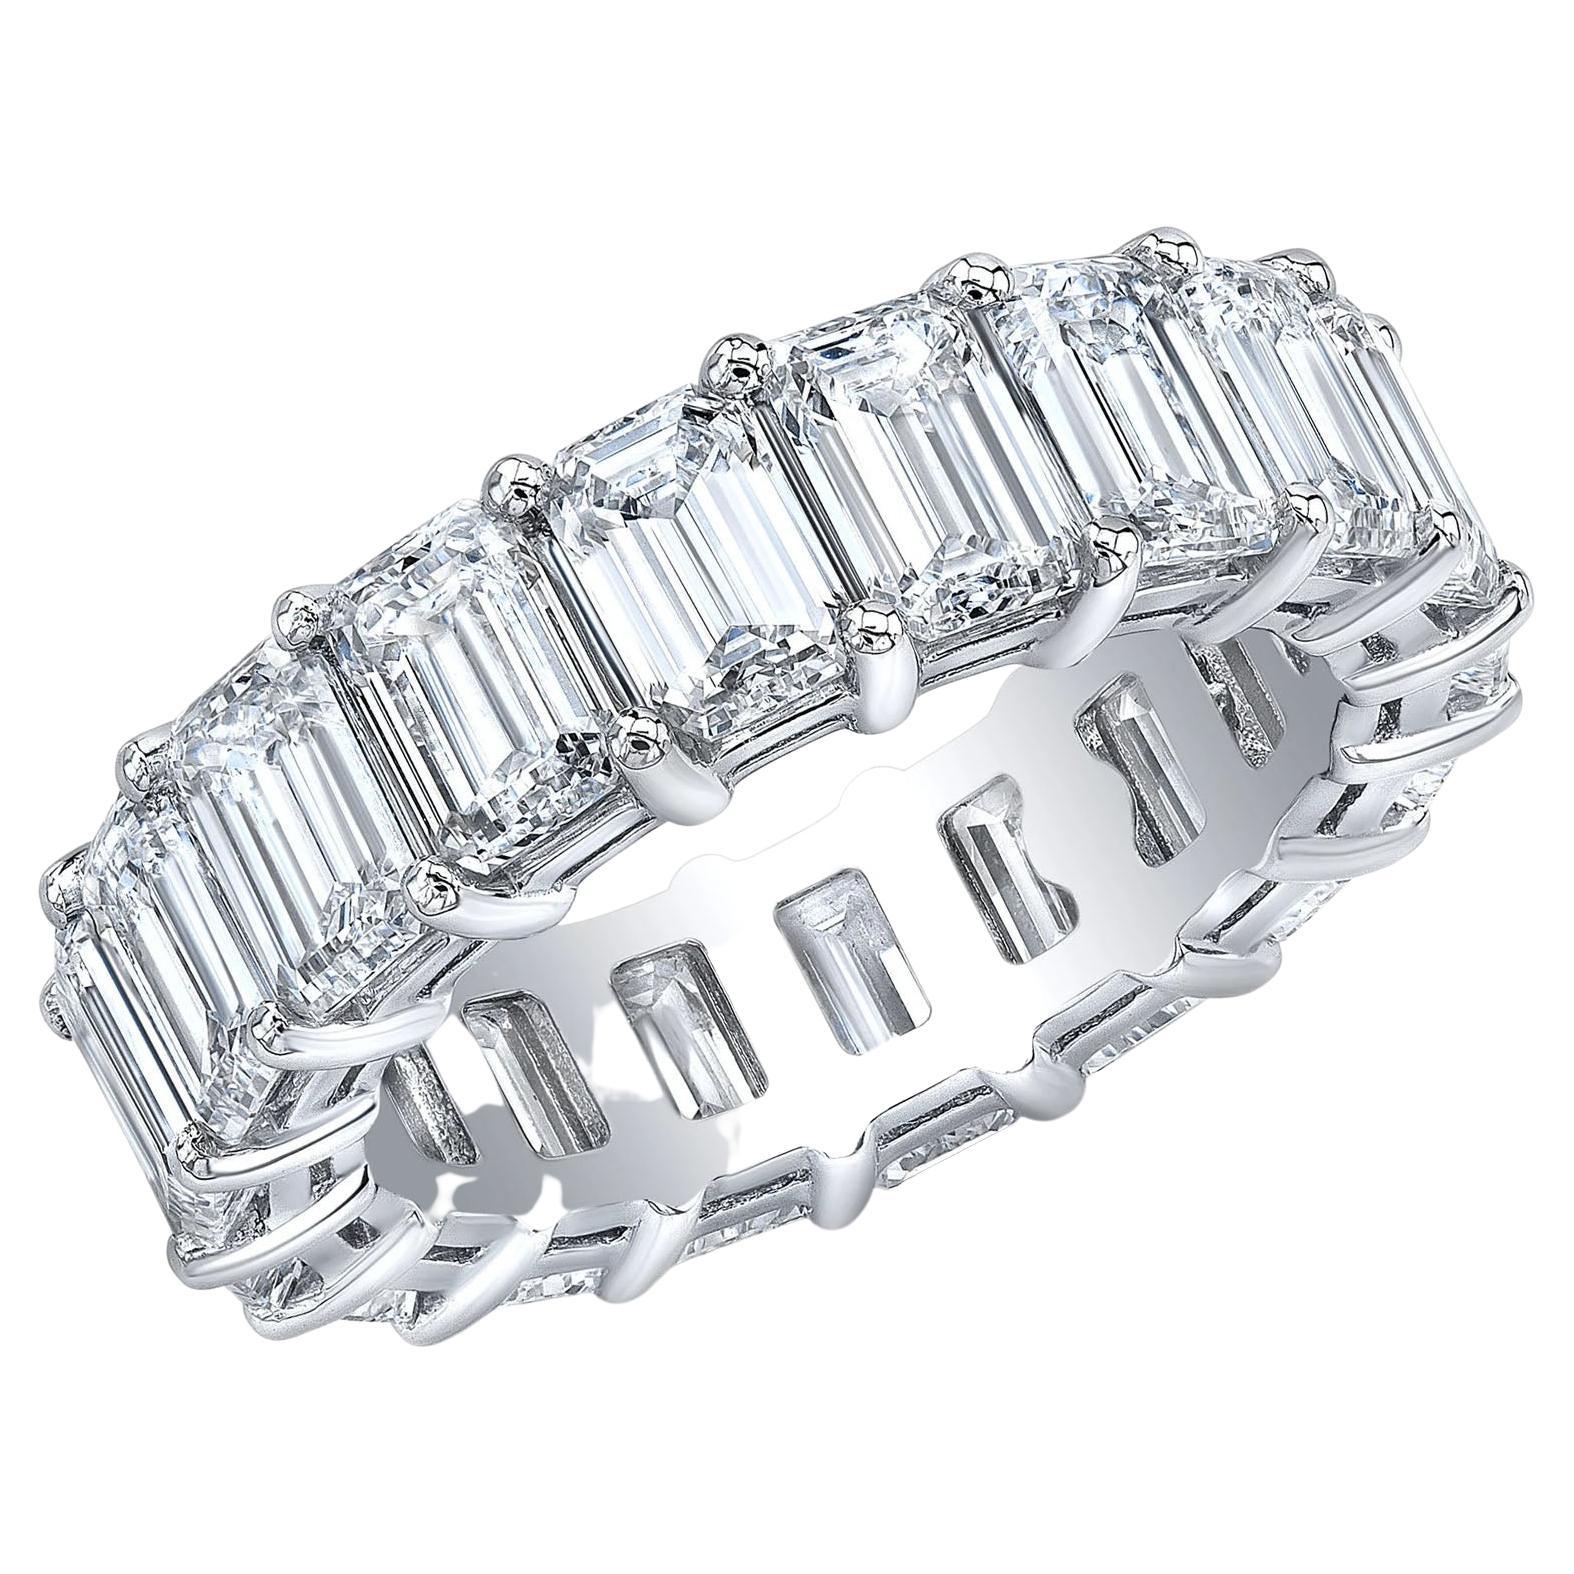 6 Carats Emerald Cut Eternity Band Shared Prongs F-G Color VS1 Clarity Platinum